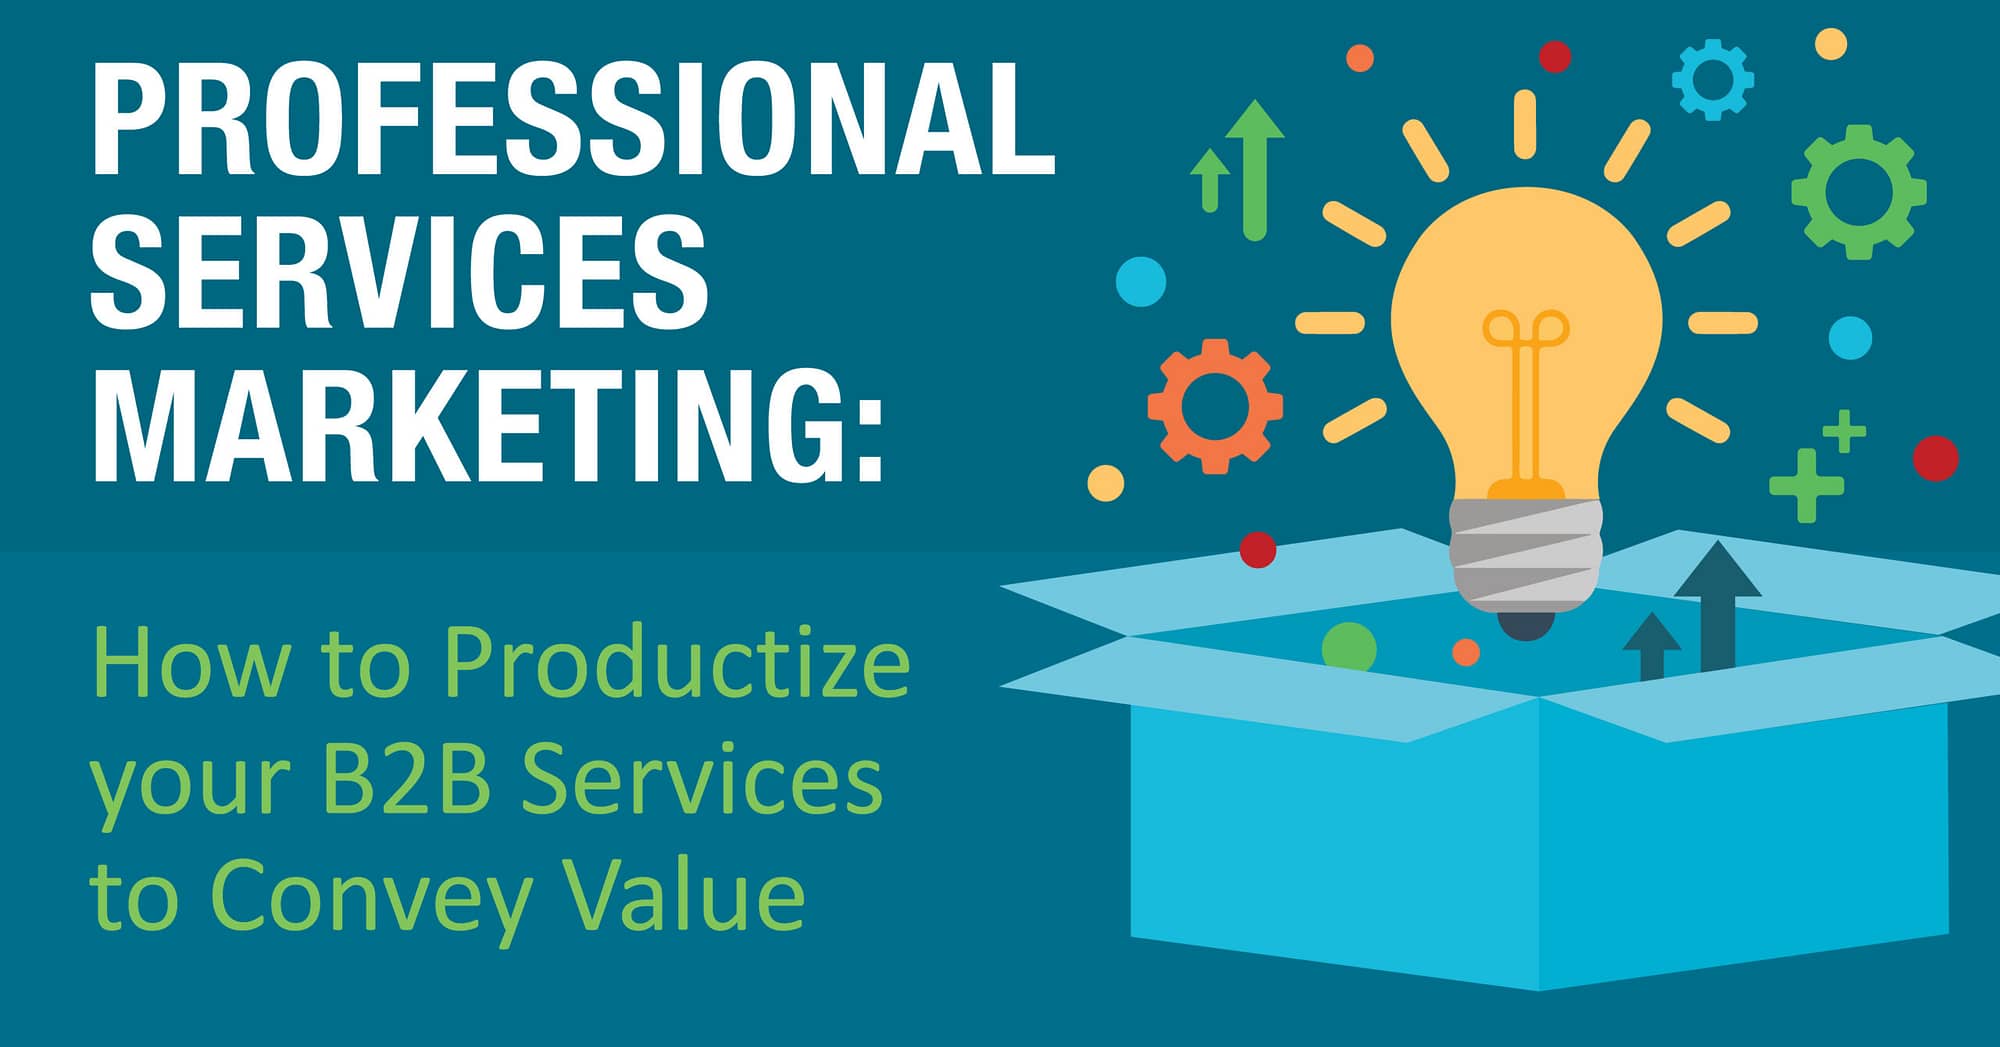 professional services marketing - productizing your b2b services